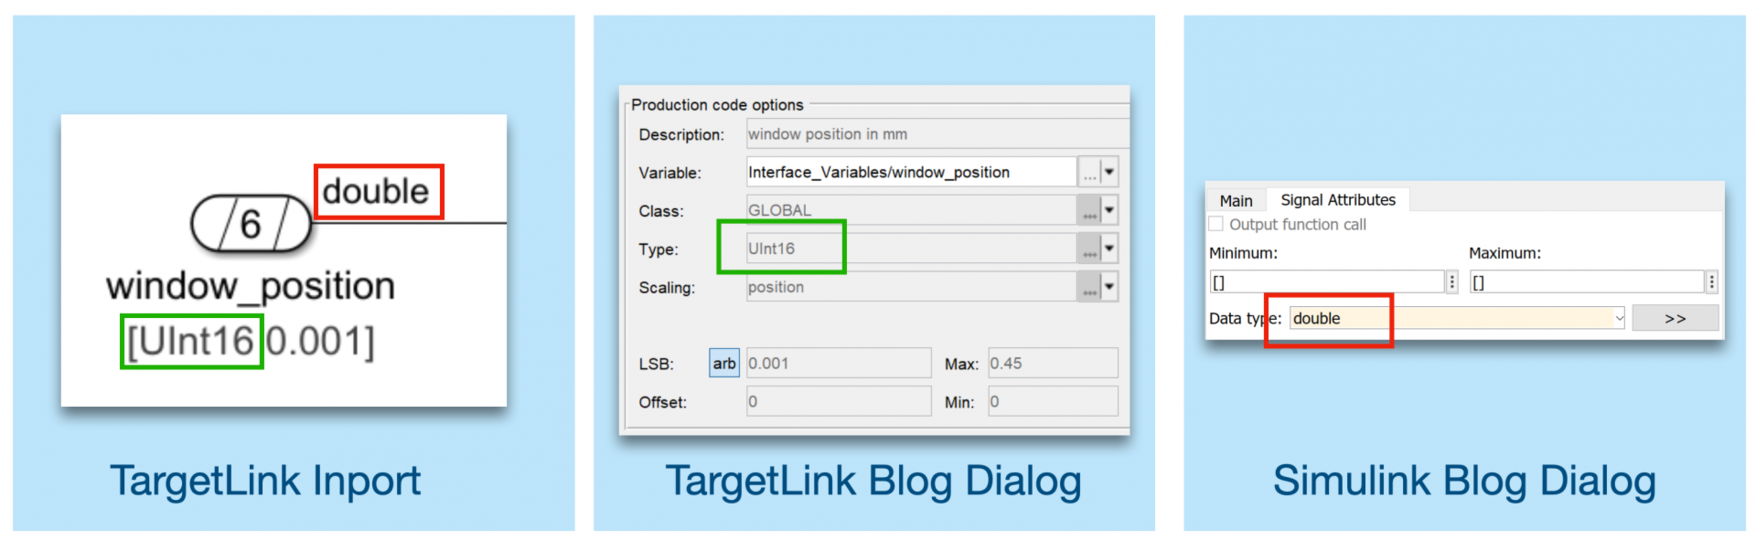 Settings for generating optimized fixed-point code from Simulink models with dSPACE TargetLink